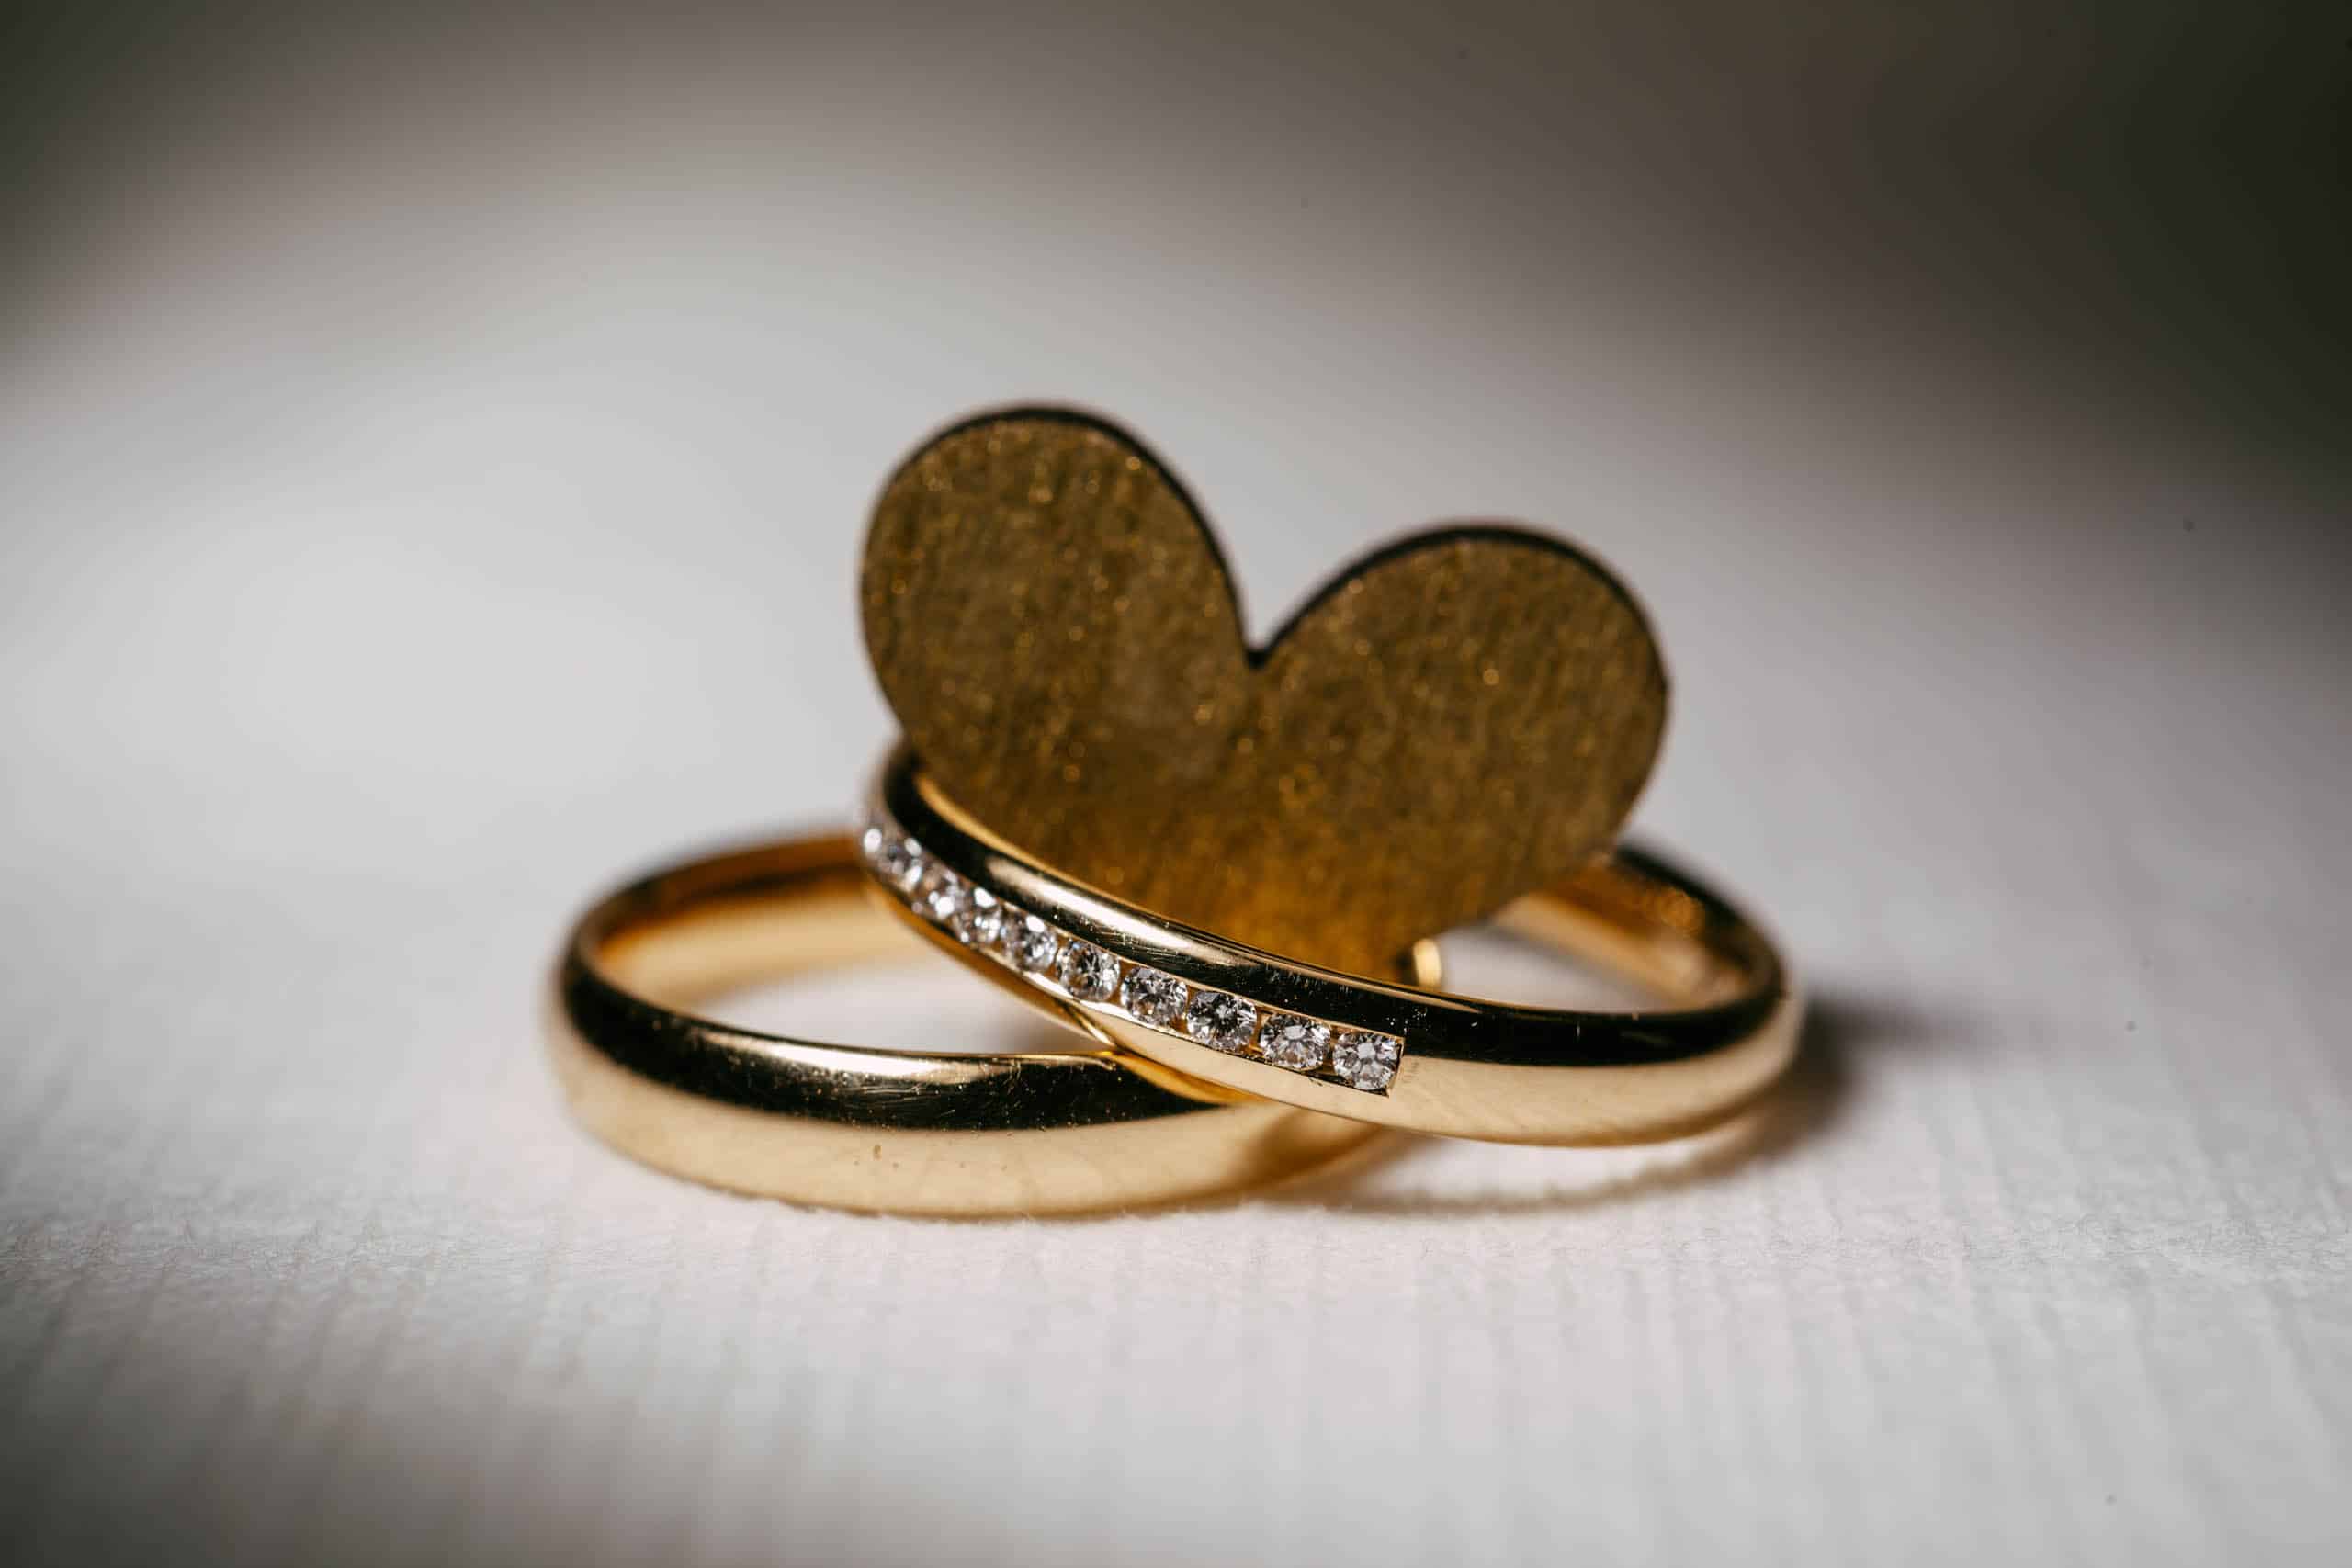 Two beautiful gold wedding rings with a heart-shaped diamond in the centre, symbolising beautiful wedding dates.